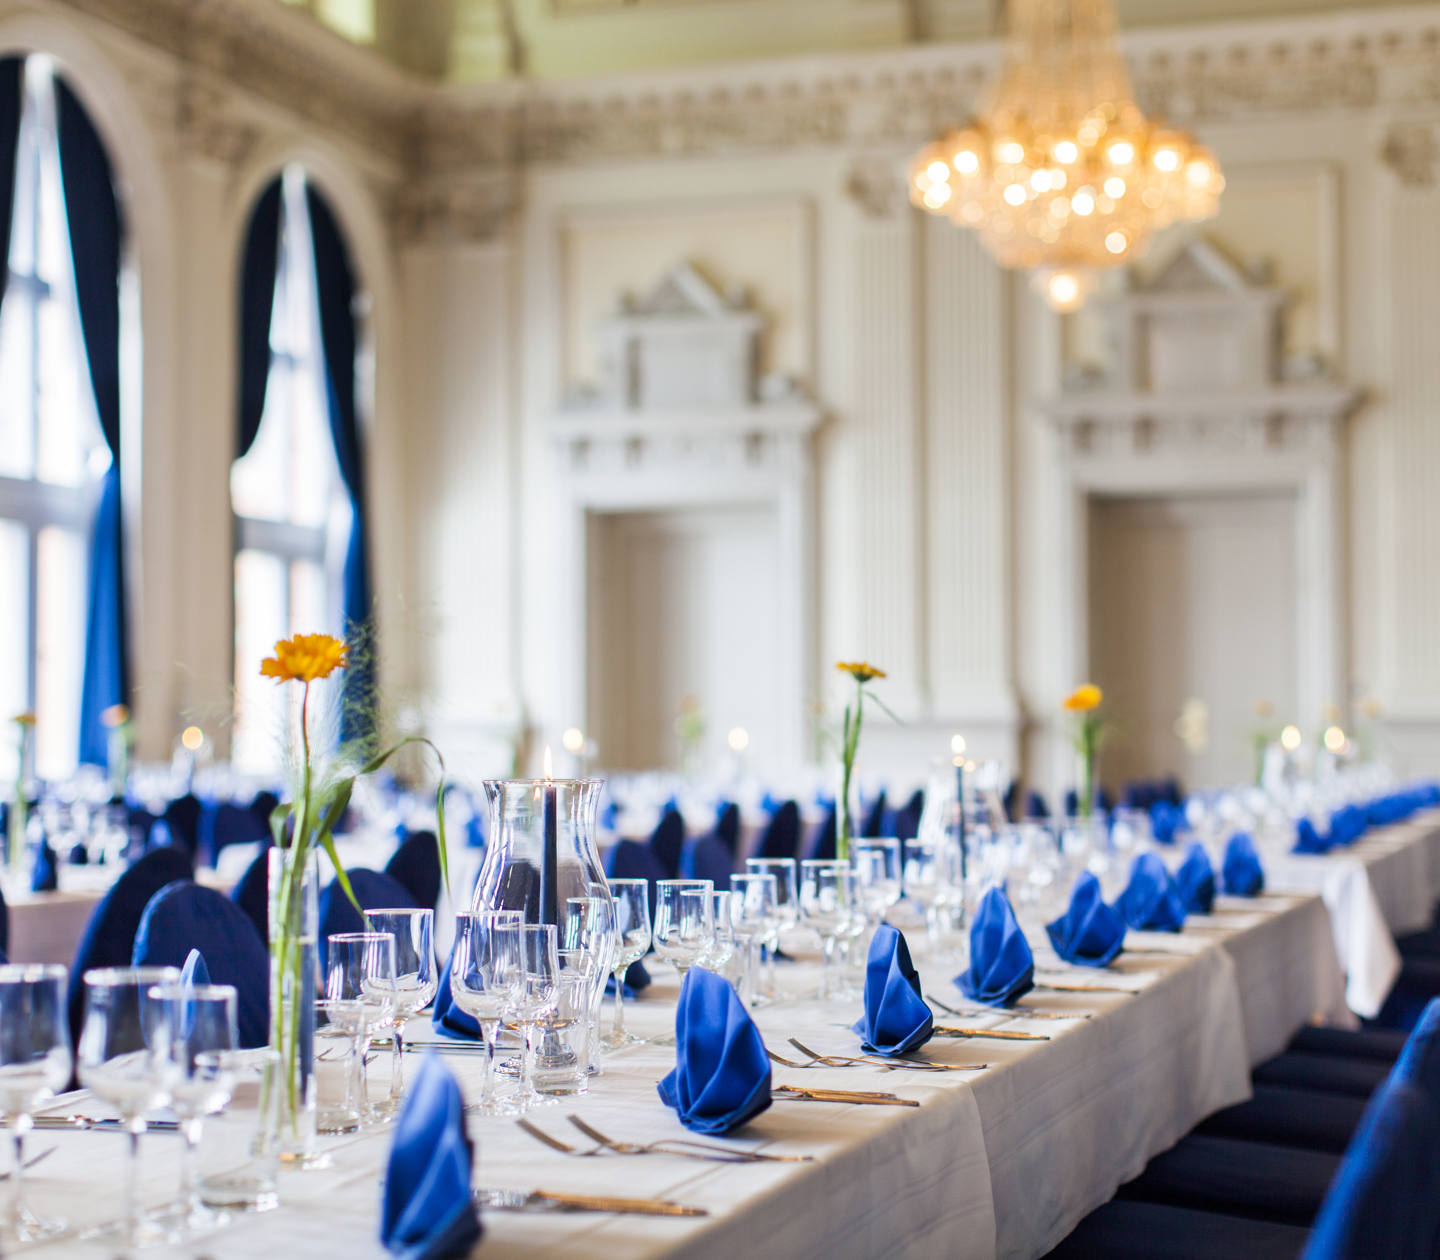 Long table in wedding venue decorated with blue napkins